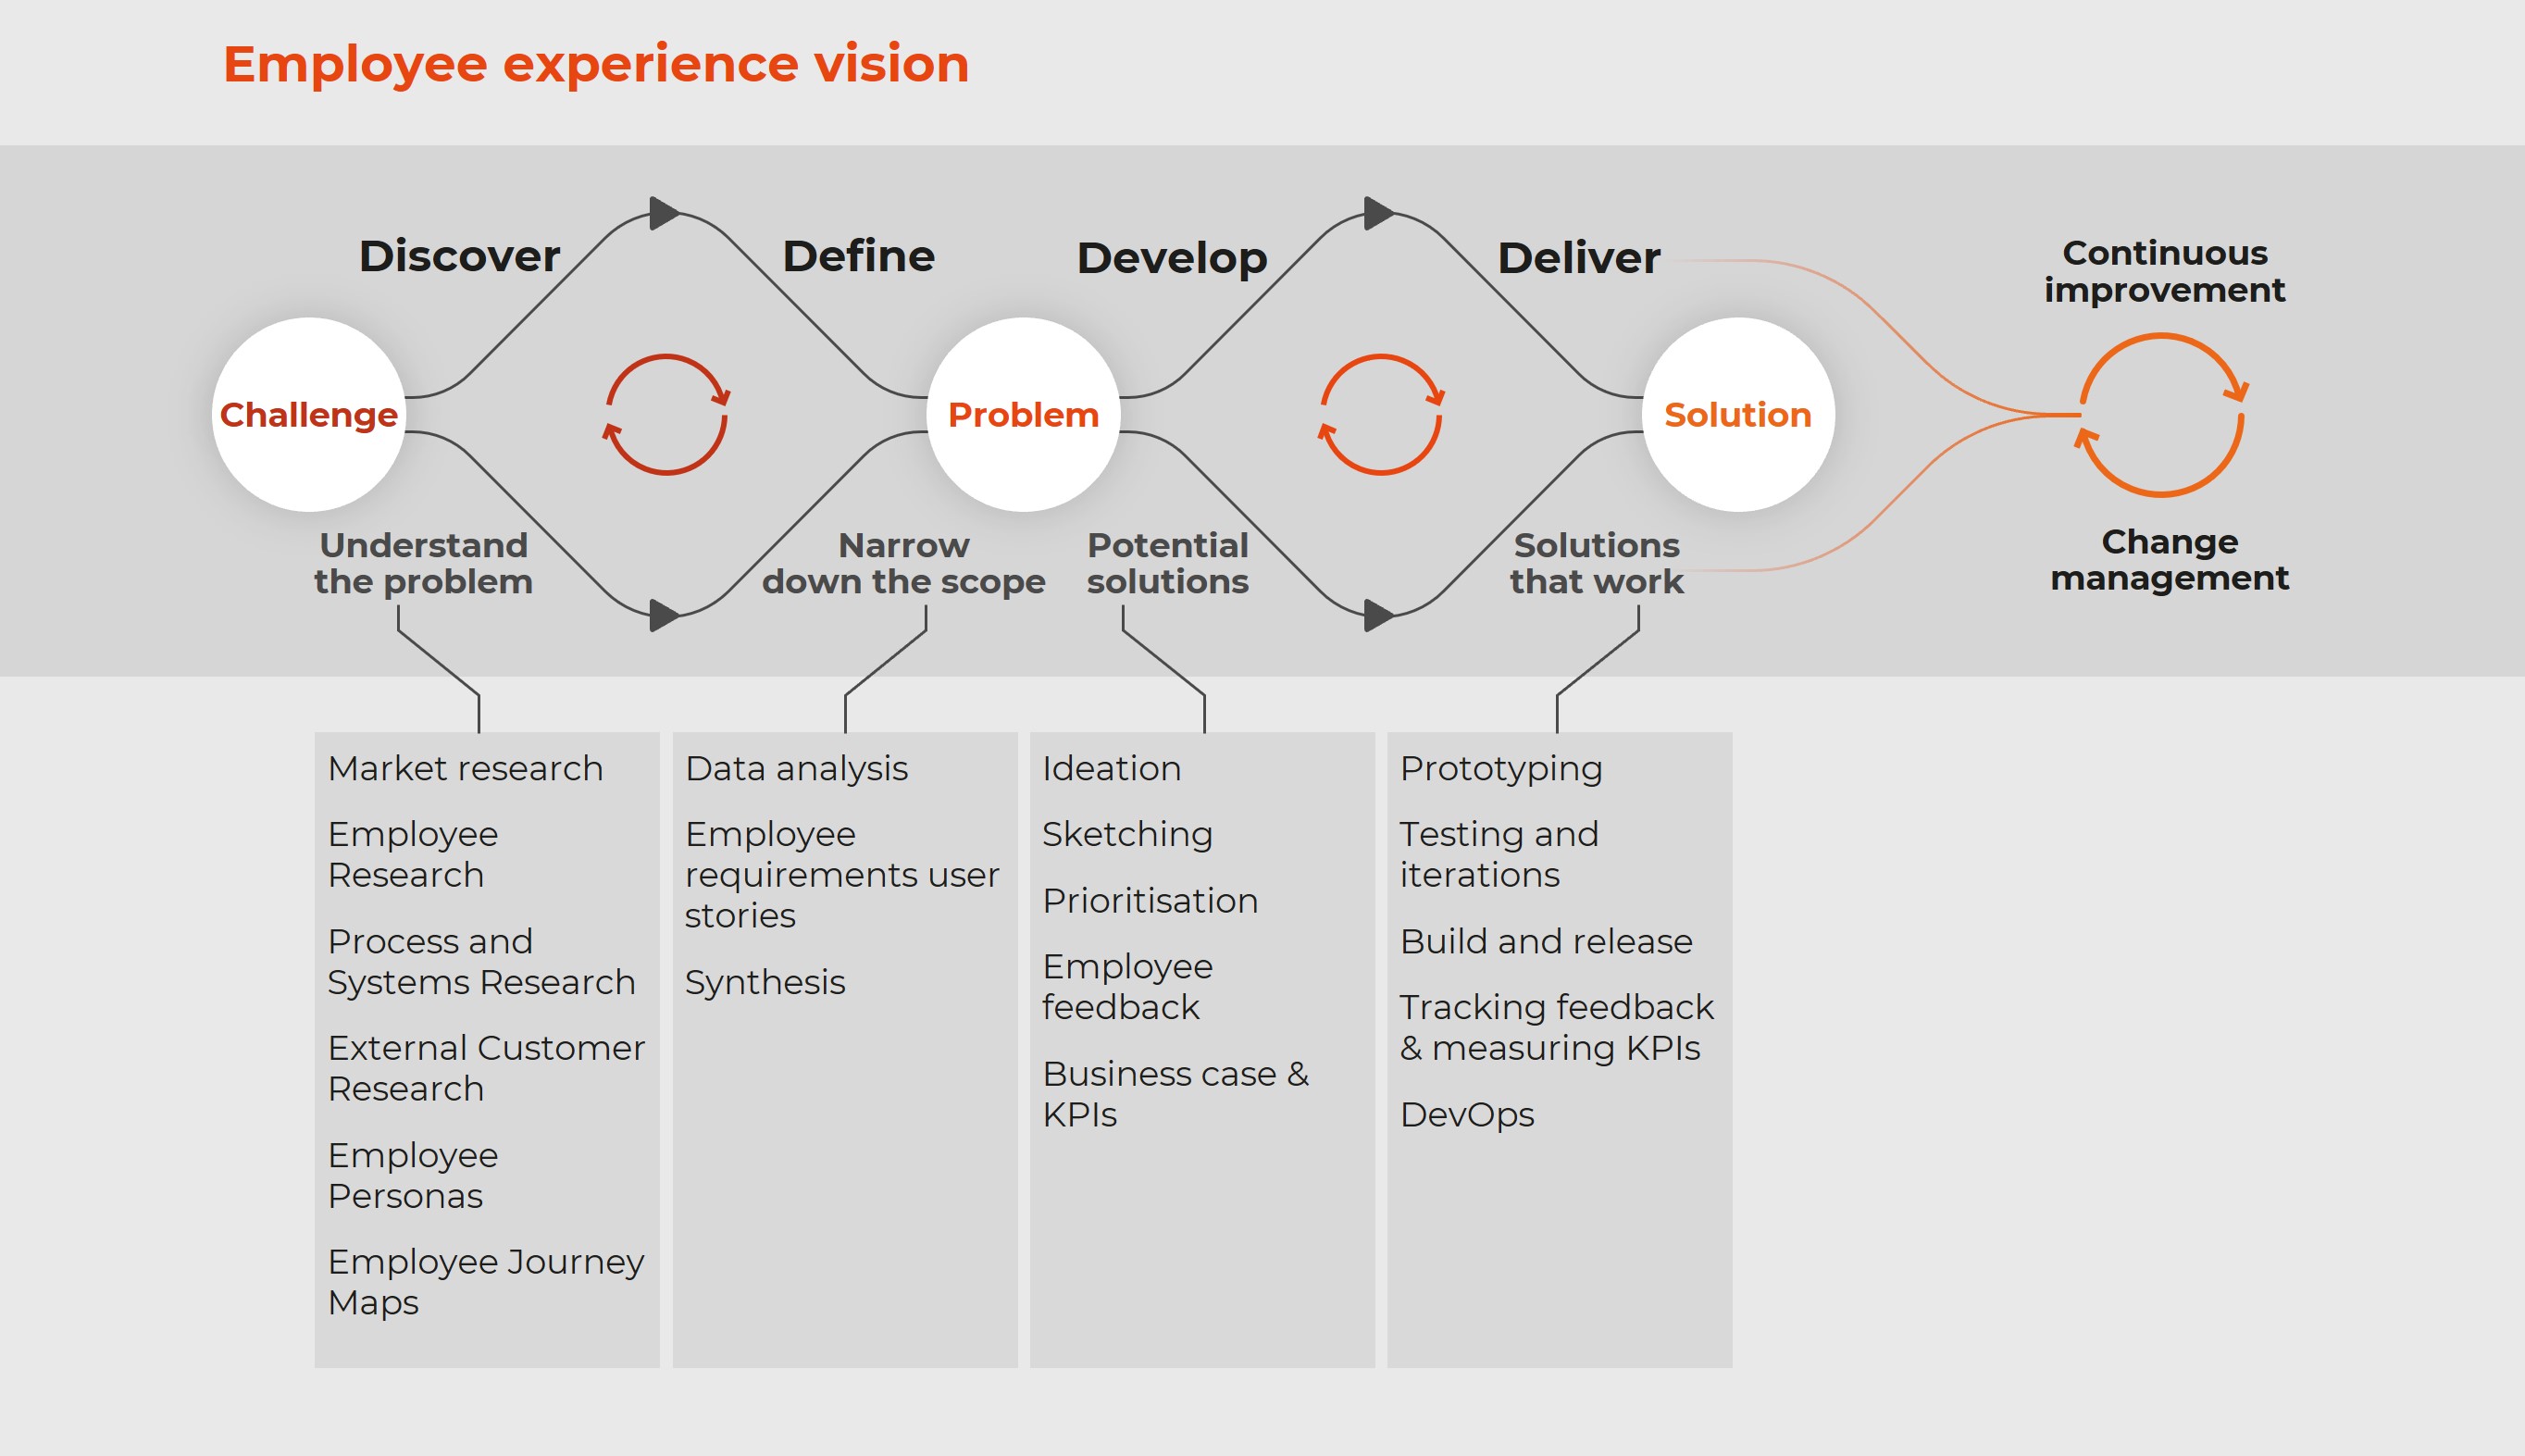 Employee experience vision graphic